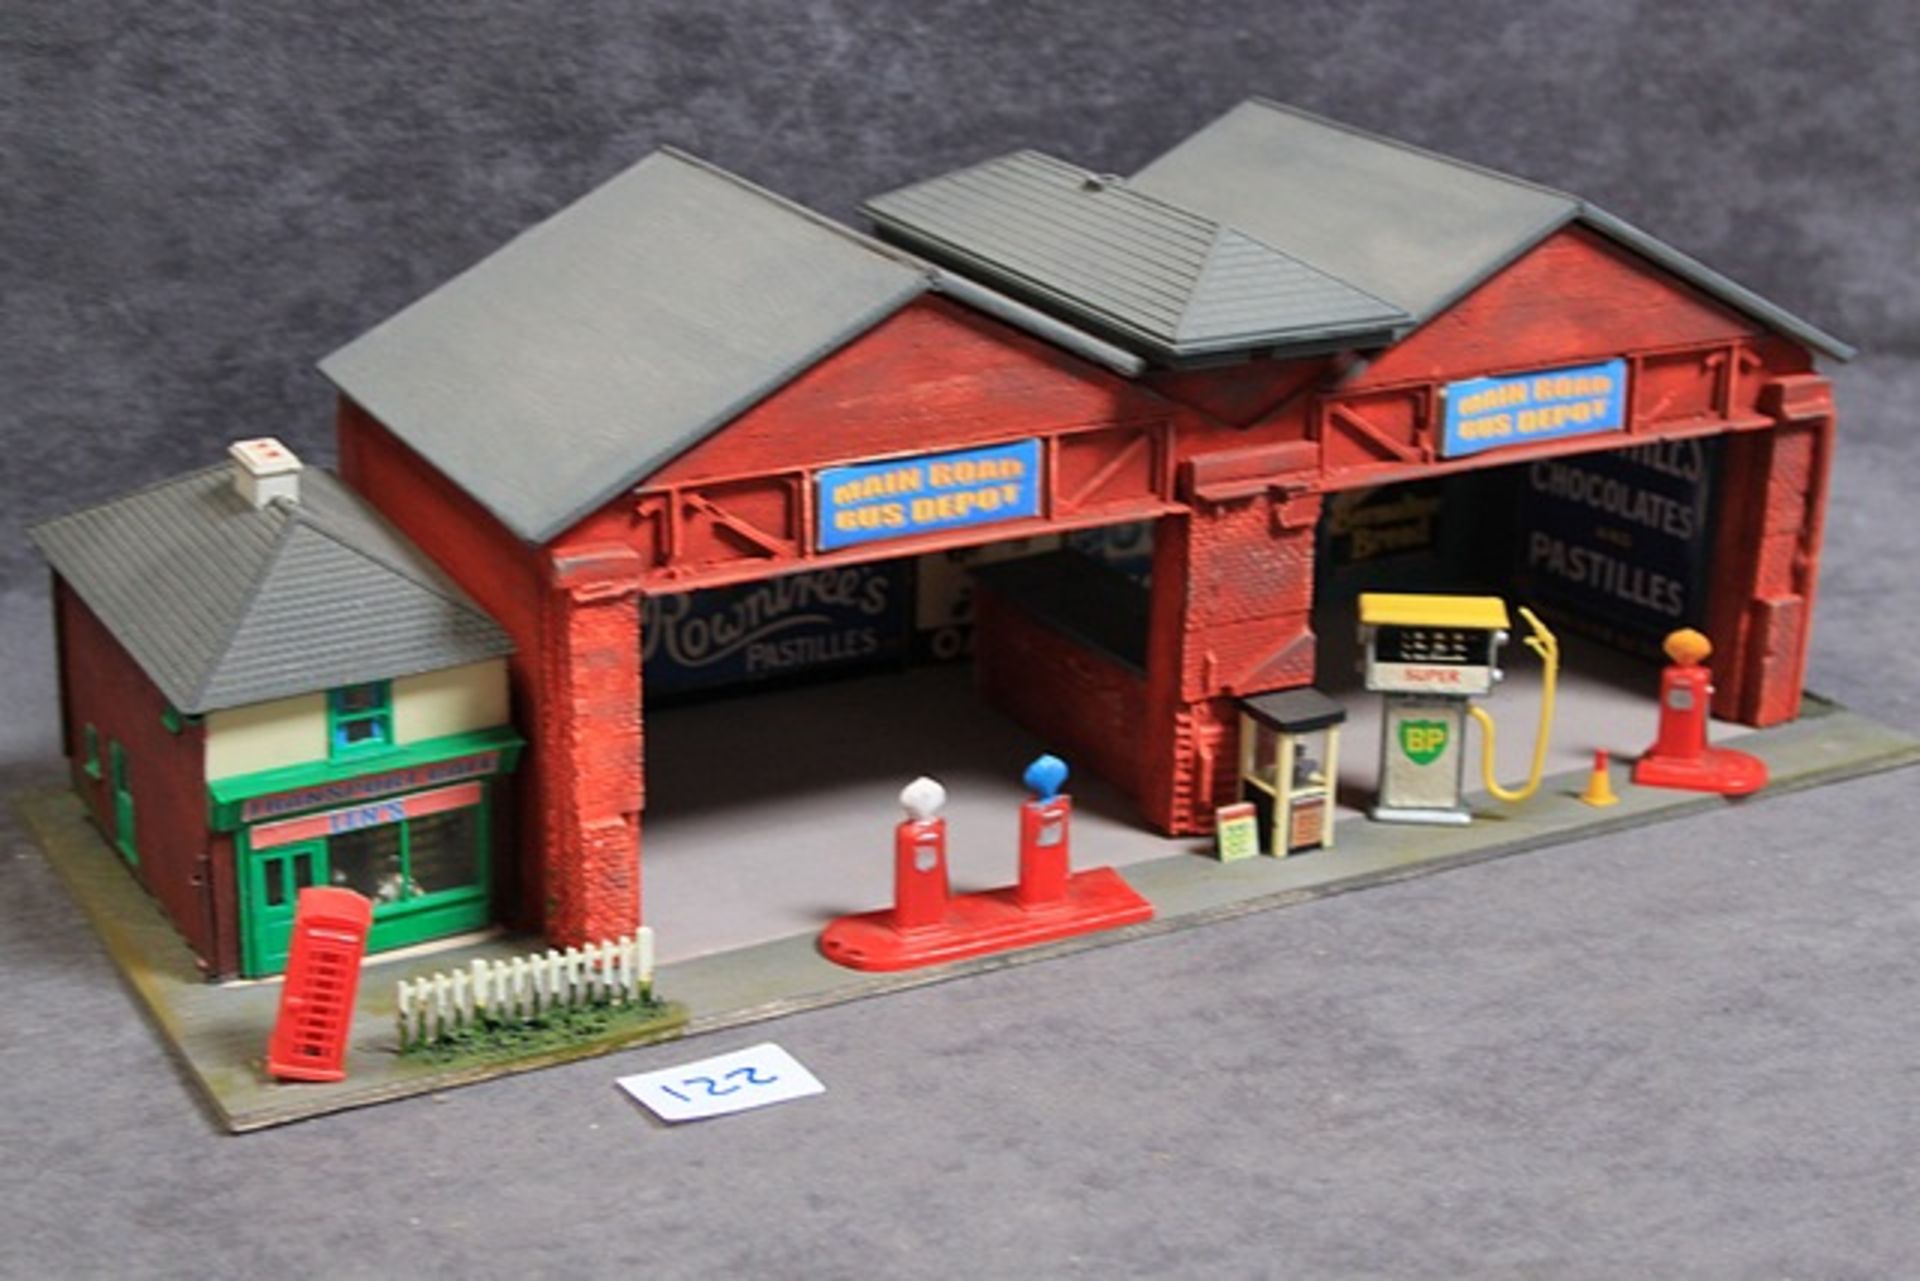 Wood Constructed Model Of Main Road Bus Depot With Petrol Pumps, Figures Forecourt And Transport - Image 2 of 3